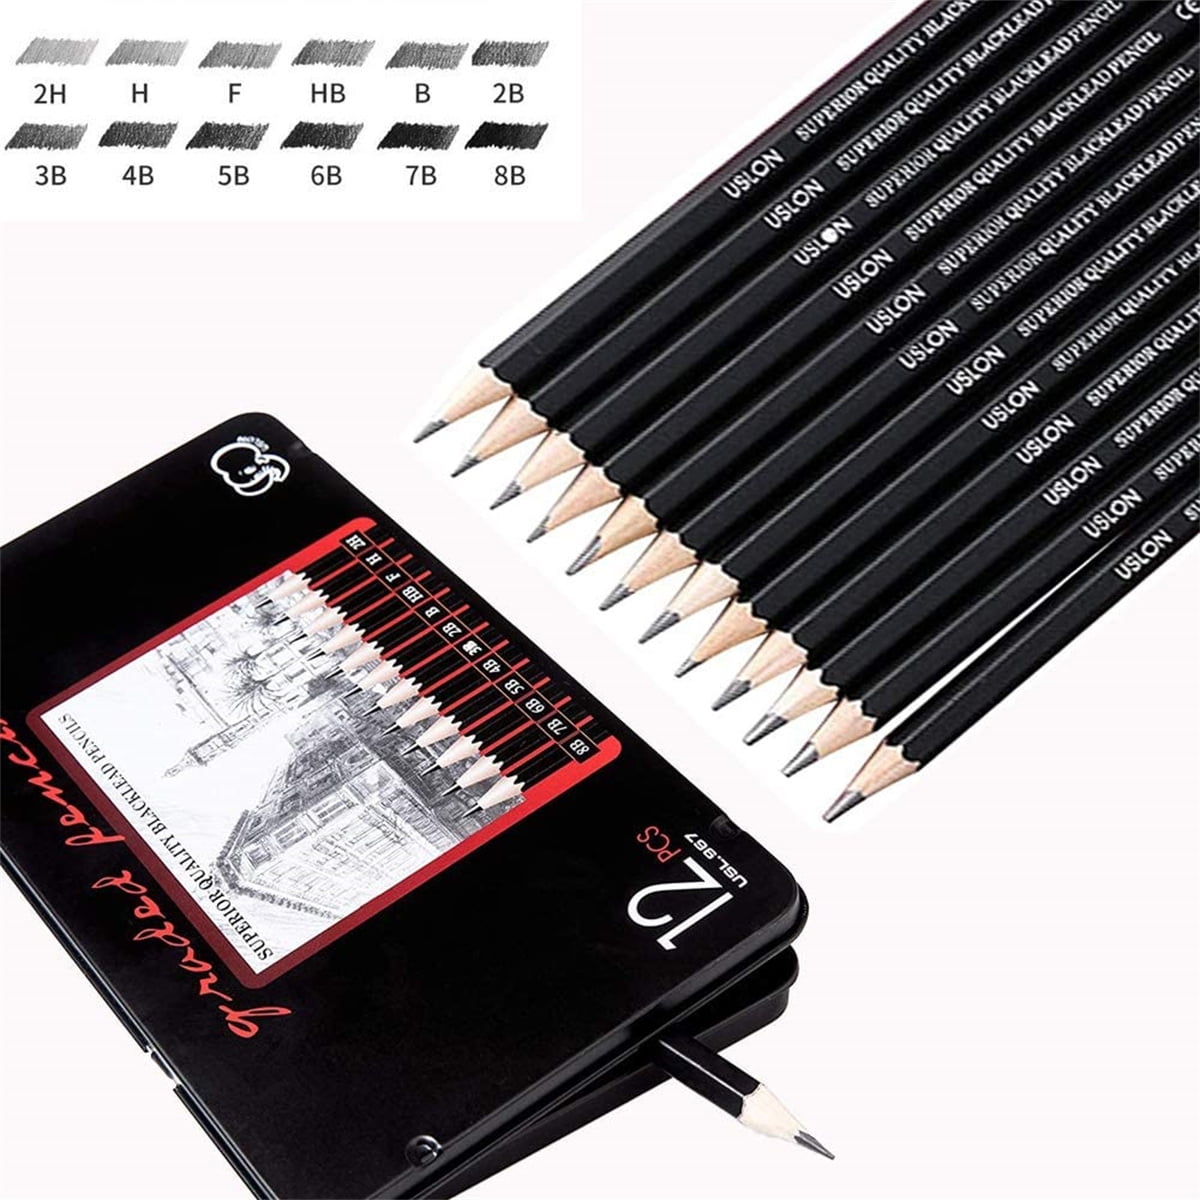 Duslogis Professional Drawing Sketch Pencils Set of 12, Medium (8B - 2H),  Ideal for Drawing Art, Sketching, Shading, Artist Pencils for Beginners 